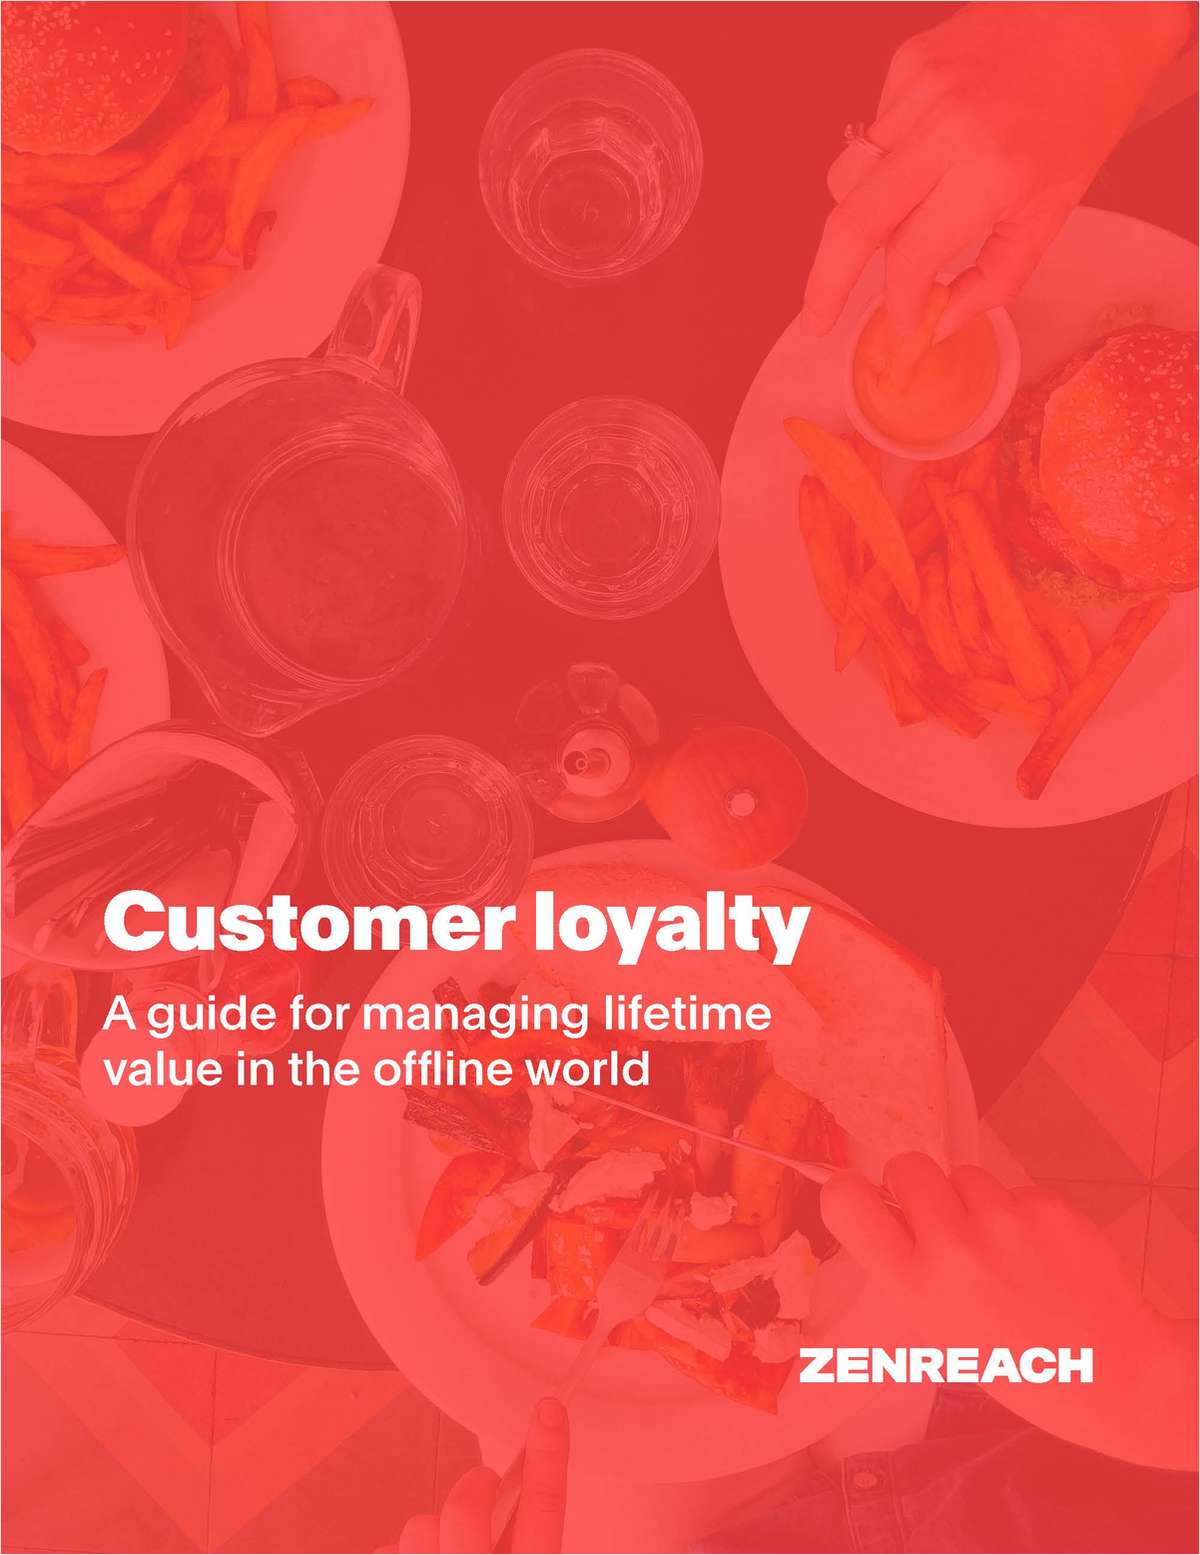 Customer Loyalty: A Guide to Understanding Lifetime Value in the Offline World